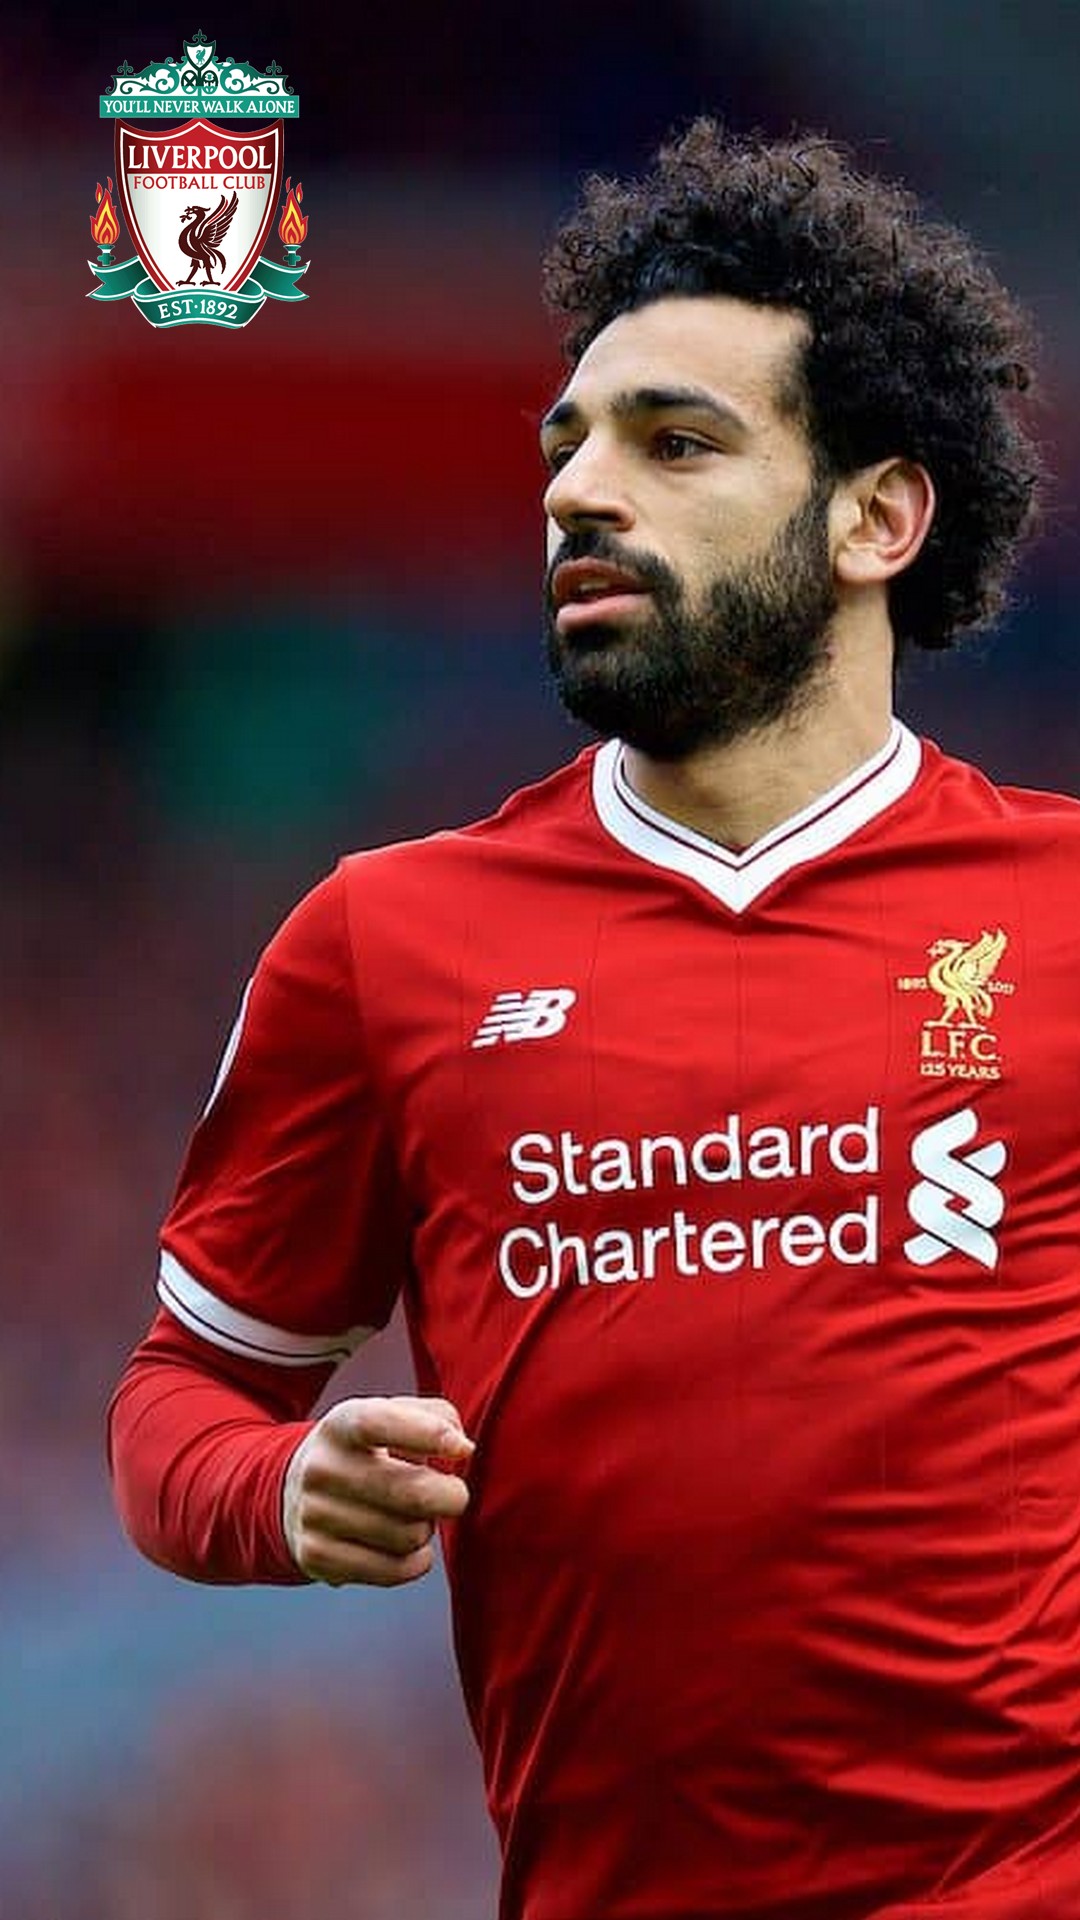 Mohamed Salah Liverpool Wallpaper For iPhone with image resolution 1080x1920 pixel. You can make this wallpaper for your iPhone 5, 6, 7, 8, X backgrounds, Mobile Screensaver, or iPad Lock Screen